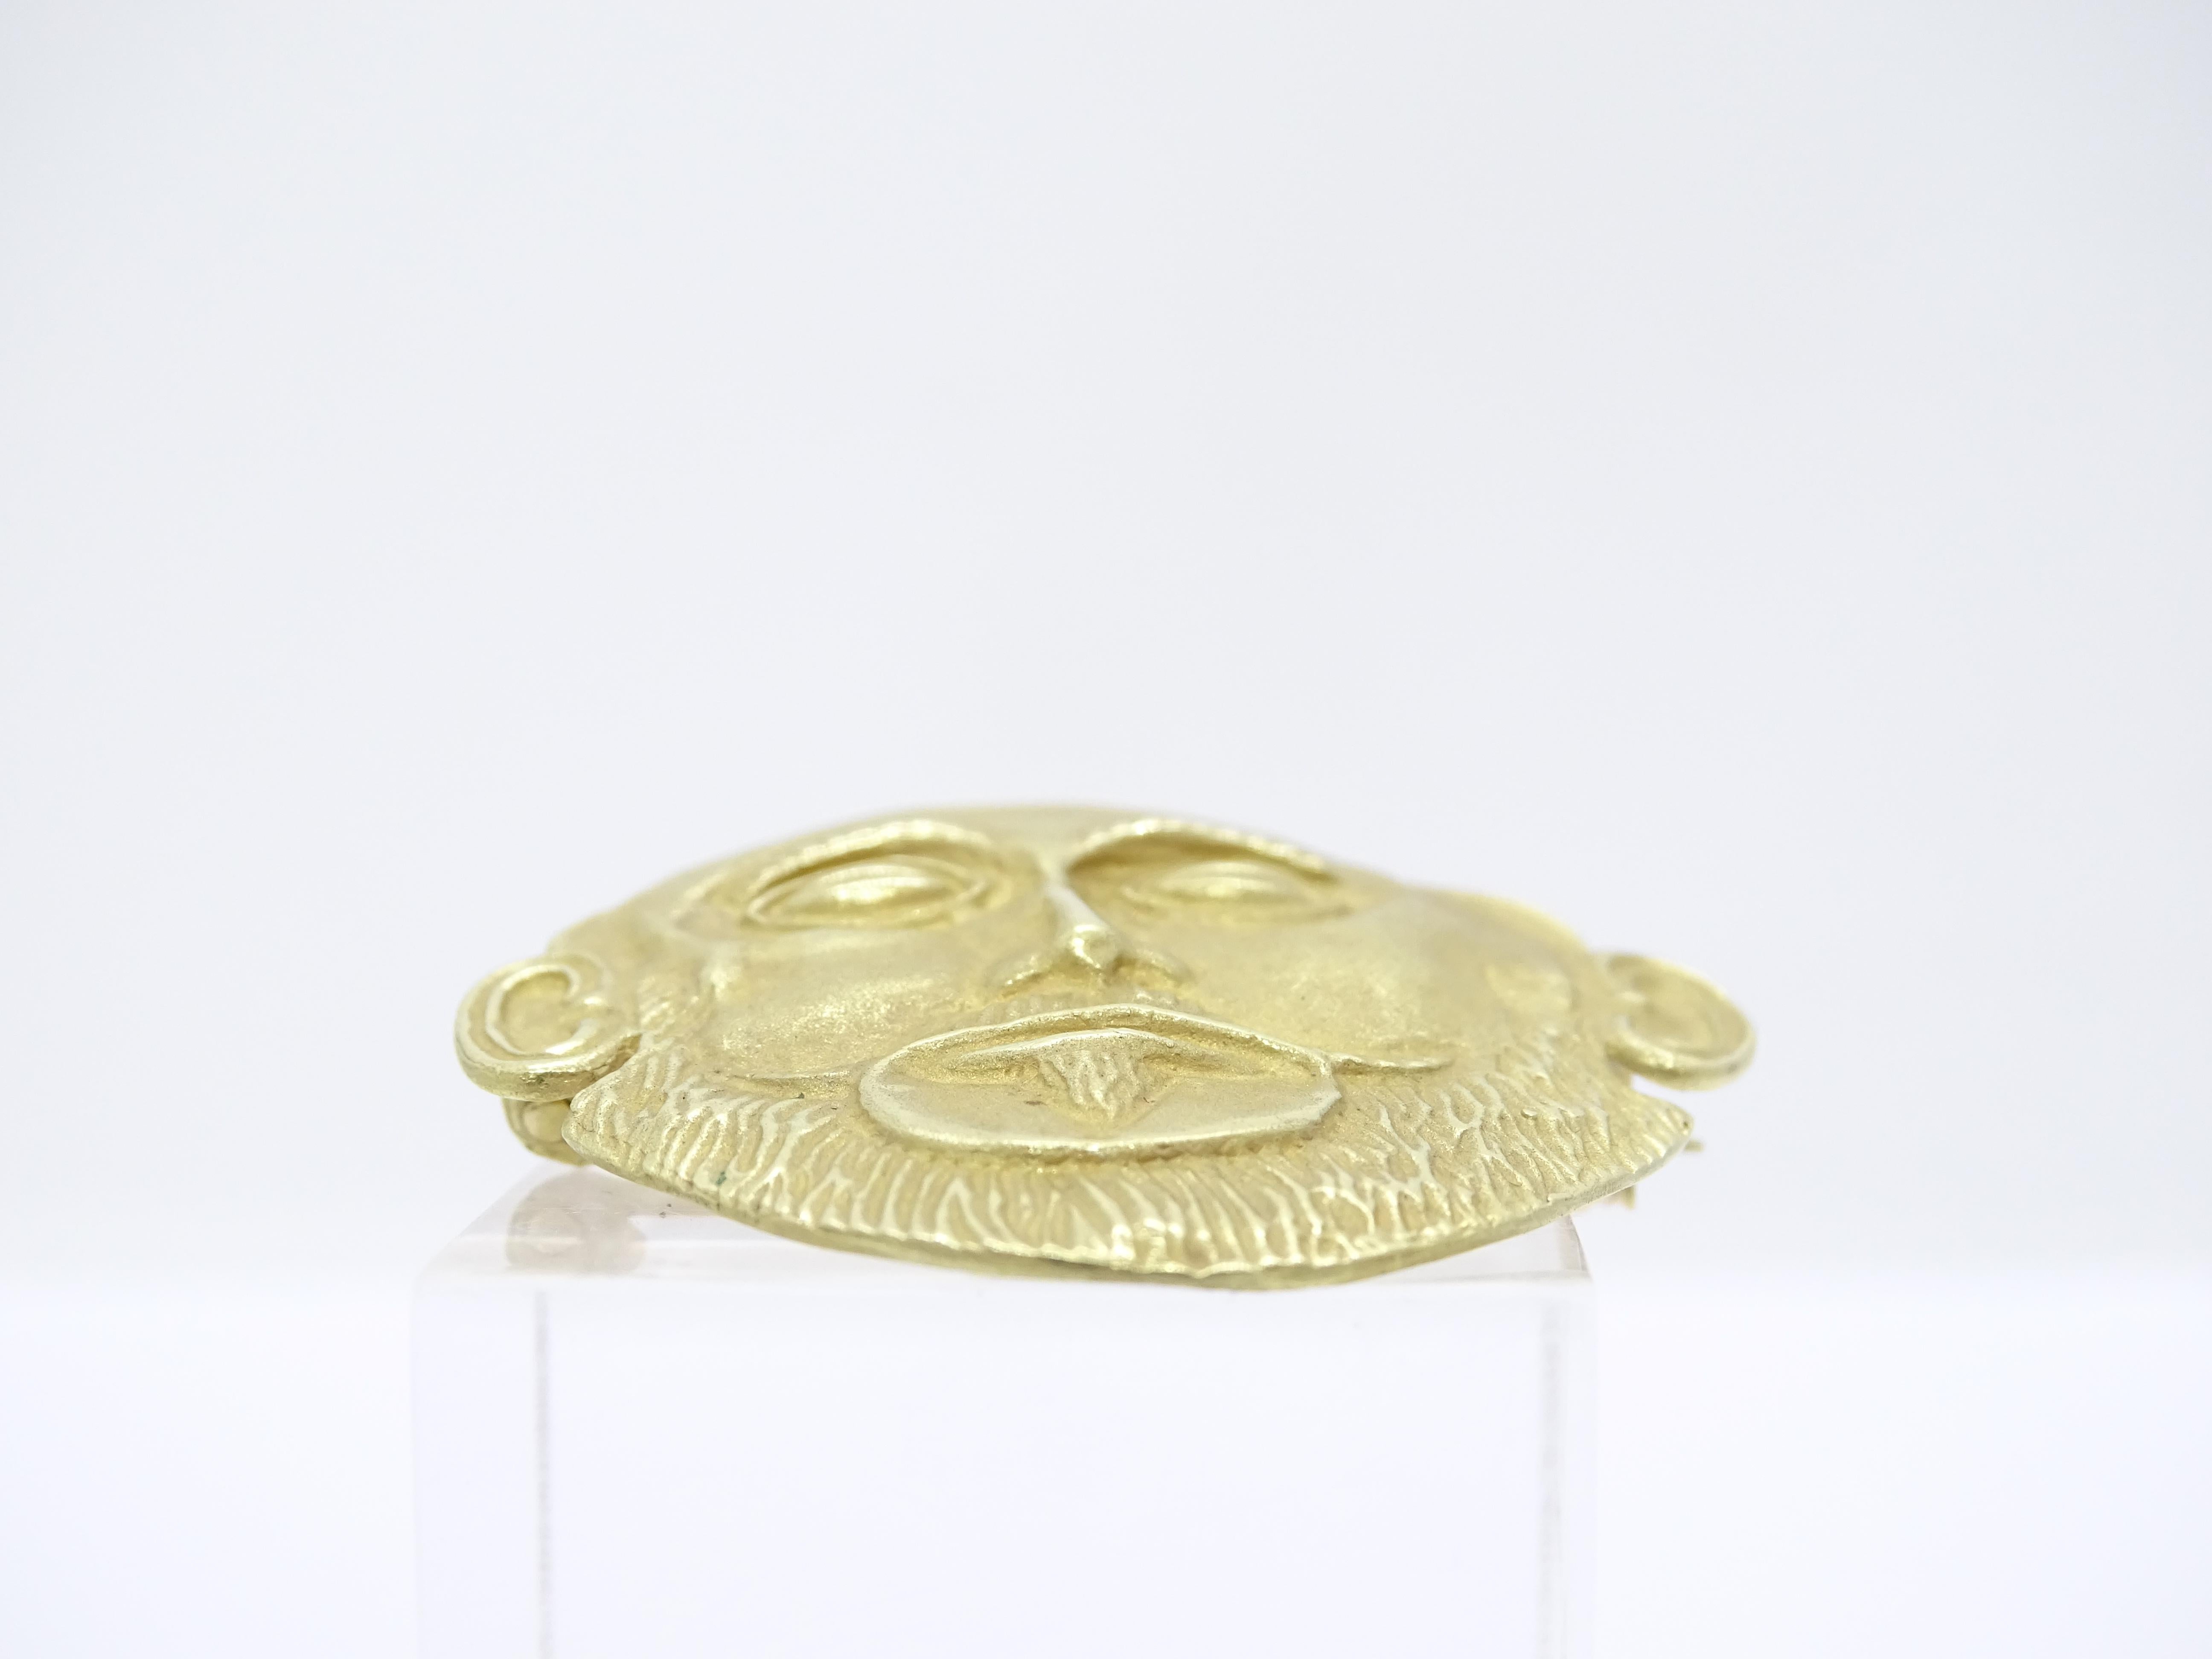 Brooch / Pendant “Mask of Agamemnon”, 18k gold, 90's For Sale 11